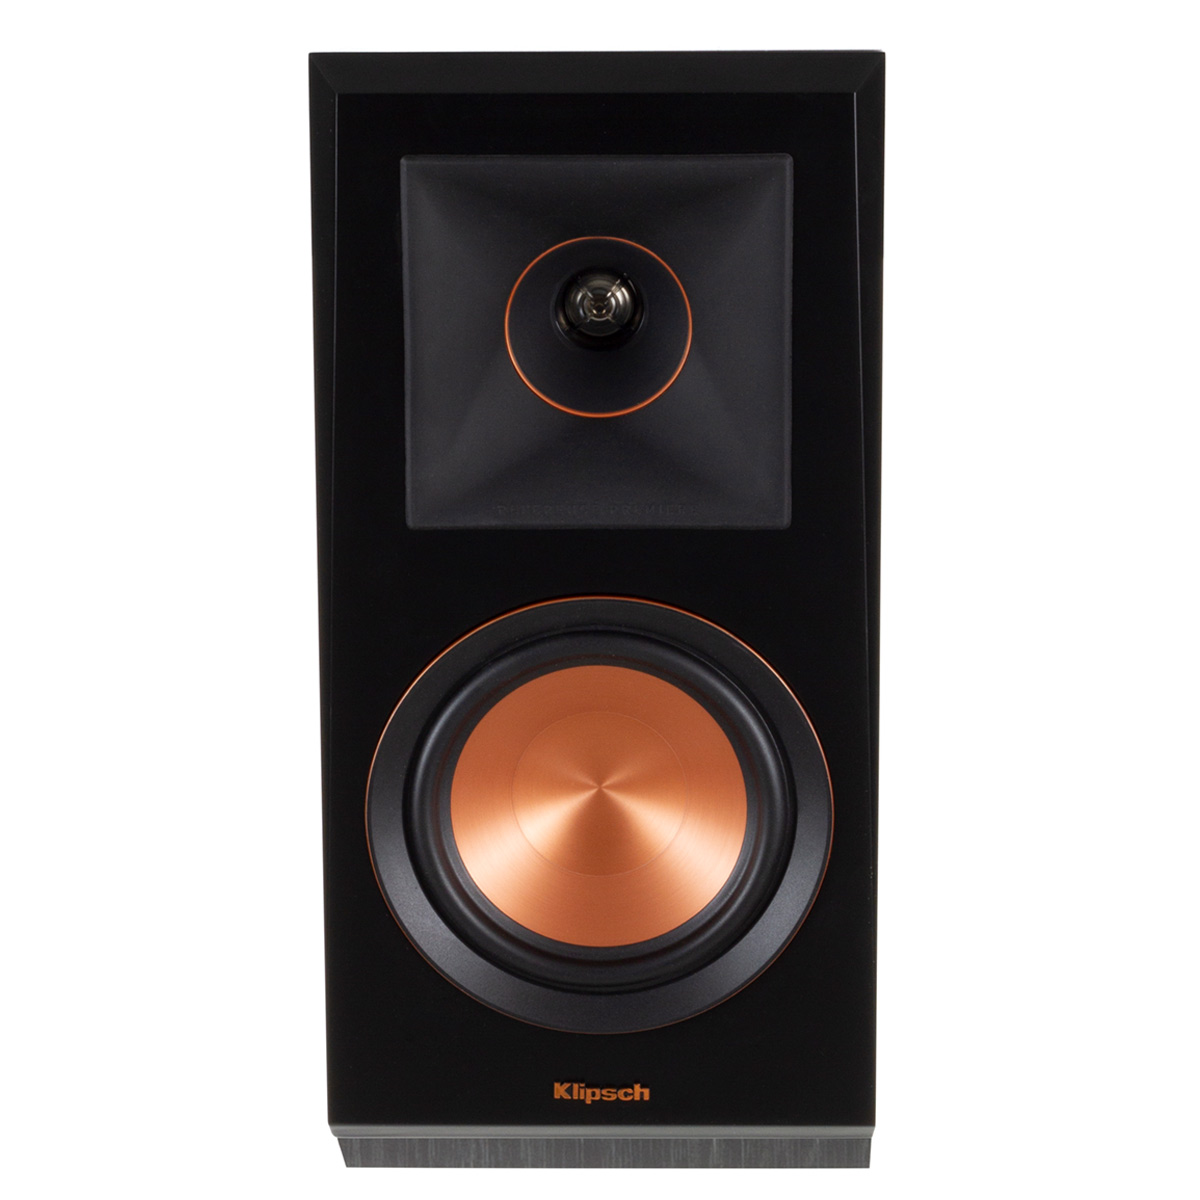 Klipsch RP-500SA Reference Premiere Dolby Atmos Speakers - Pair (Ebony) - image 5 of 7